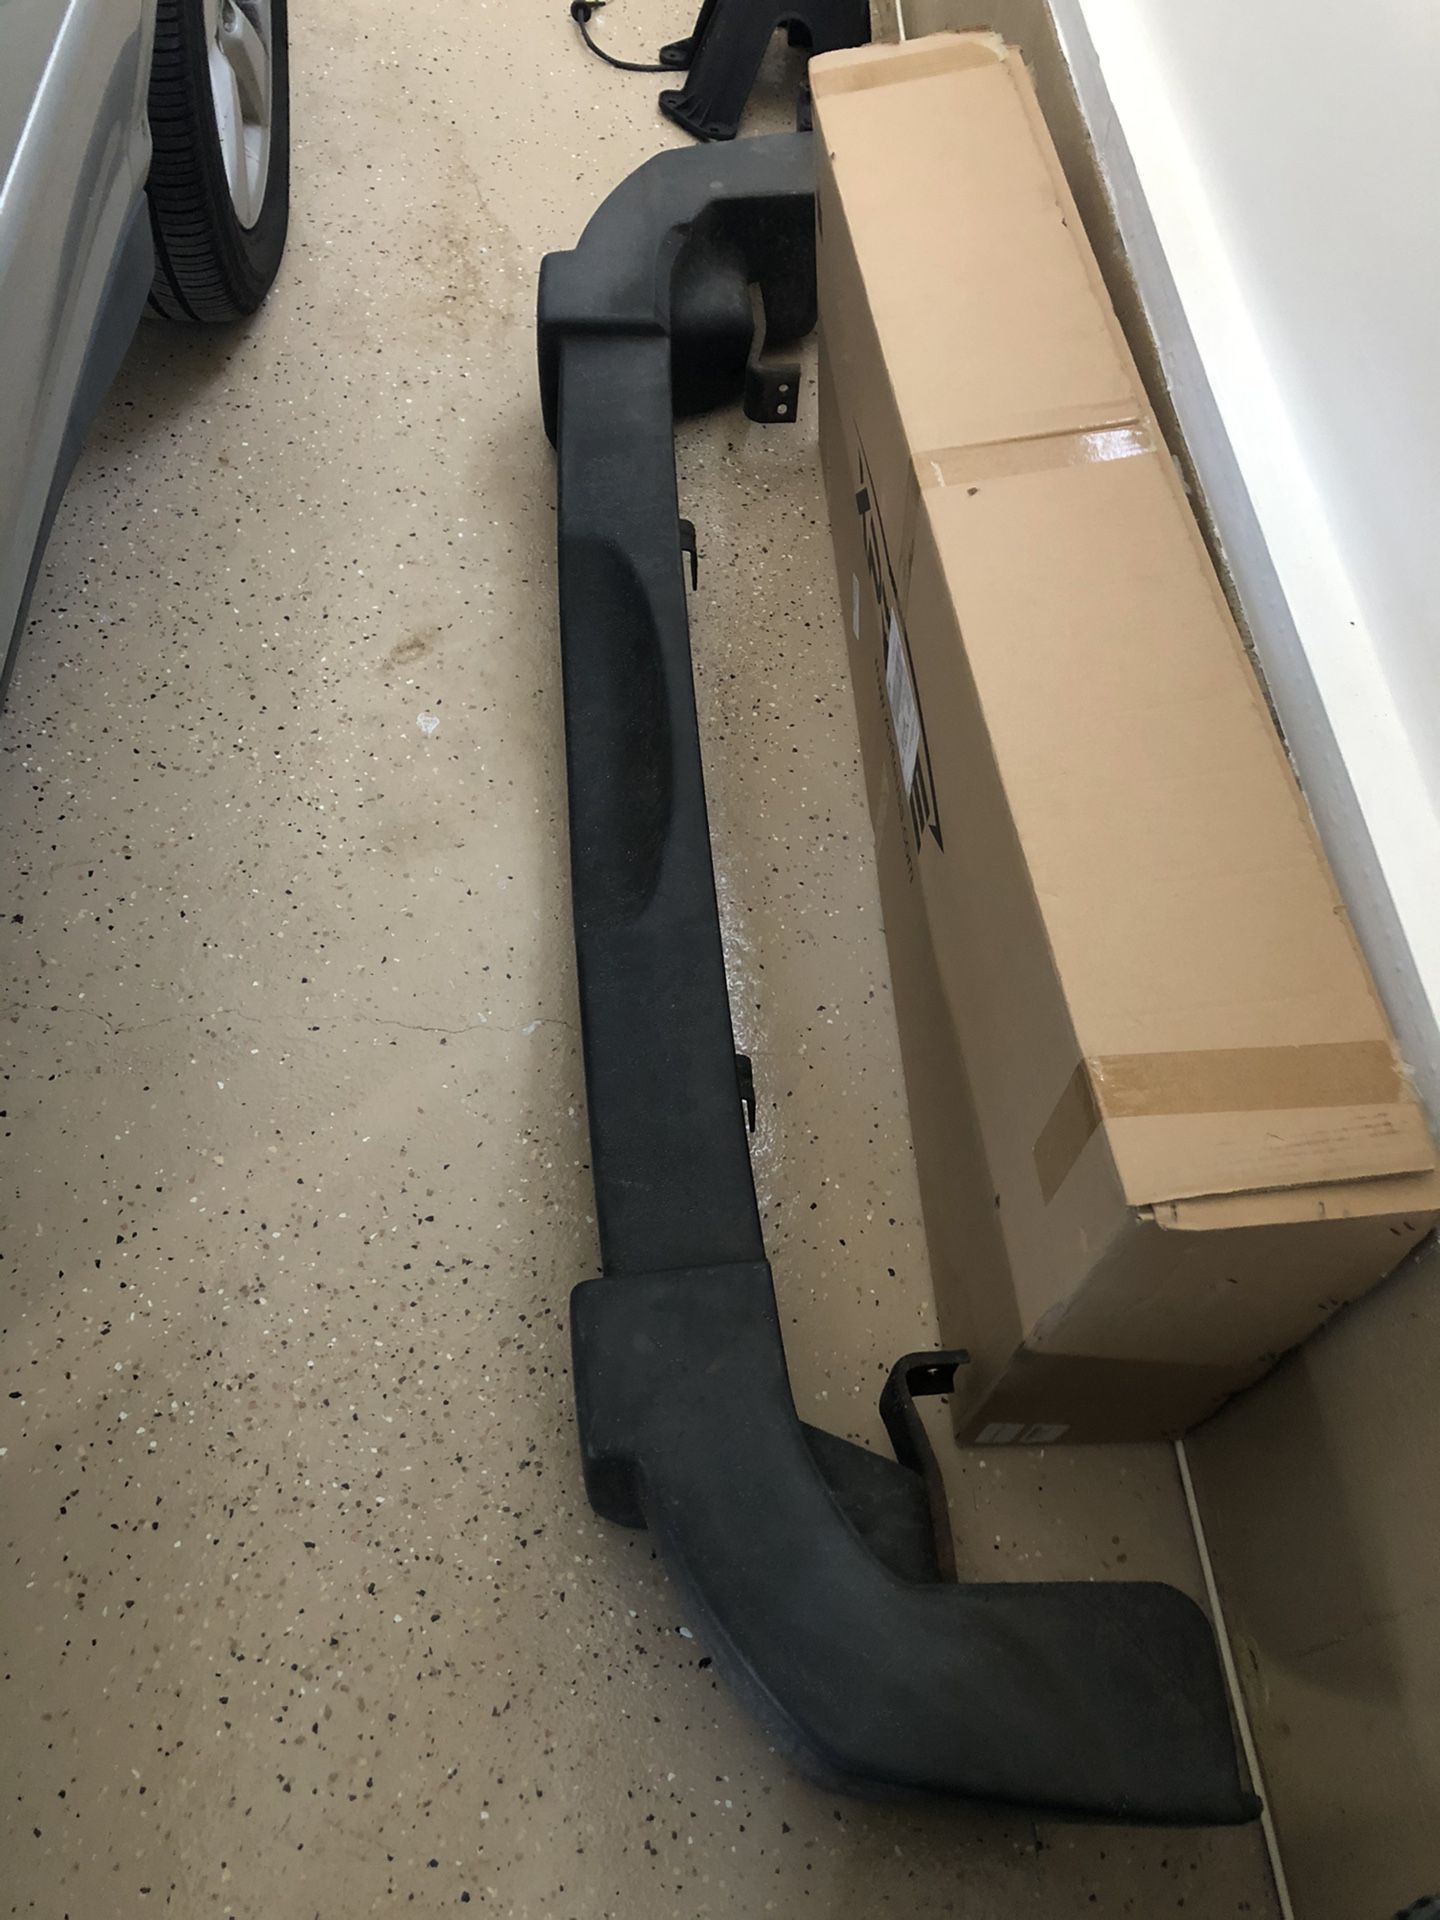 Jk 2007 Jeep Wrangler Parts. OEM rear bumper, hitch, and tire carrier. Willing to sell separately.